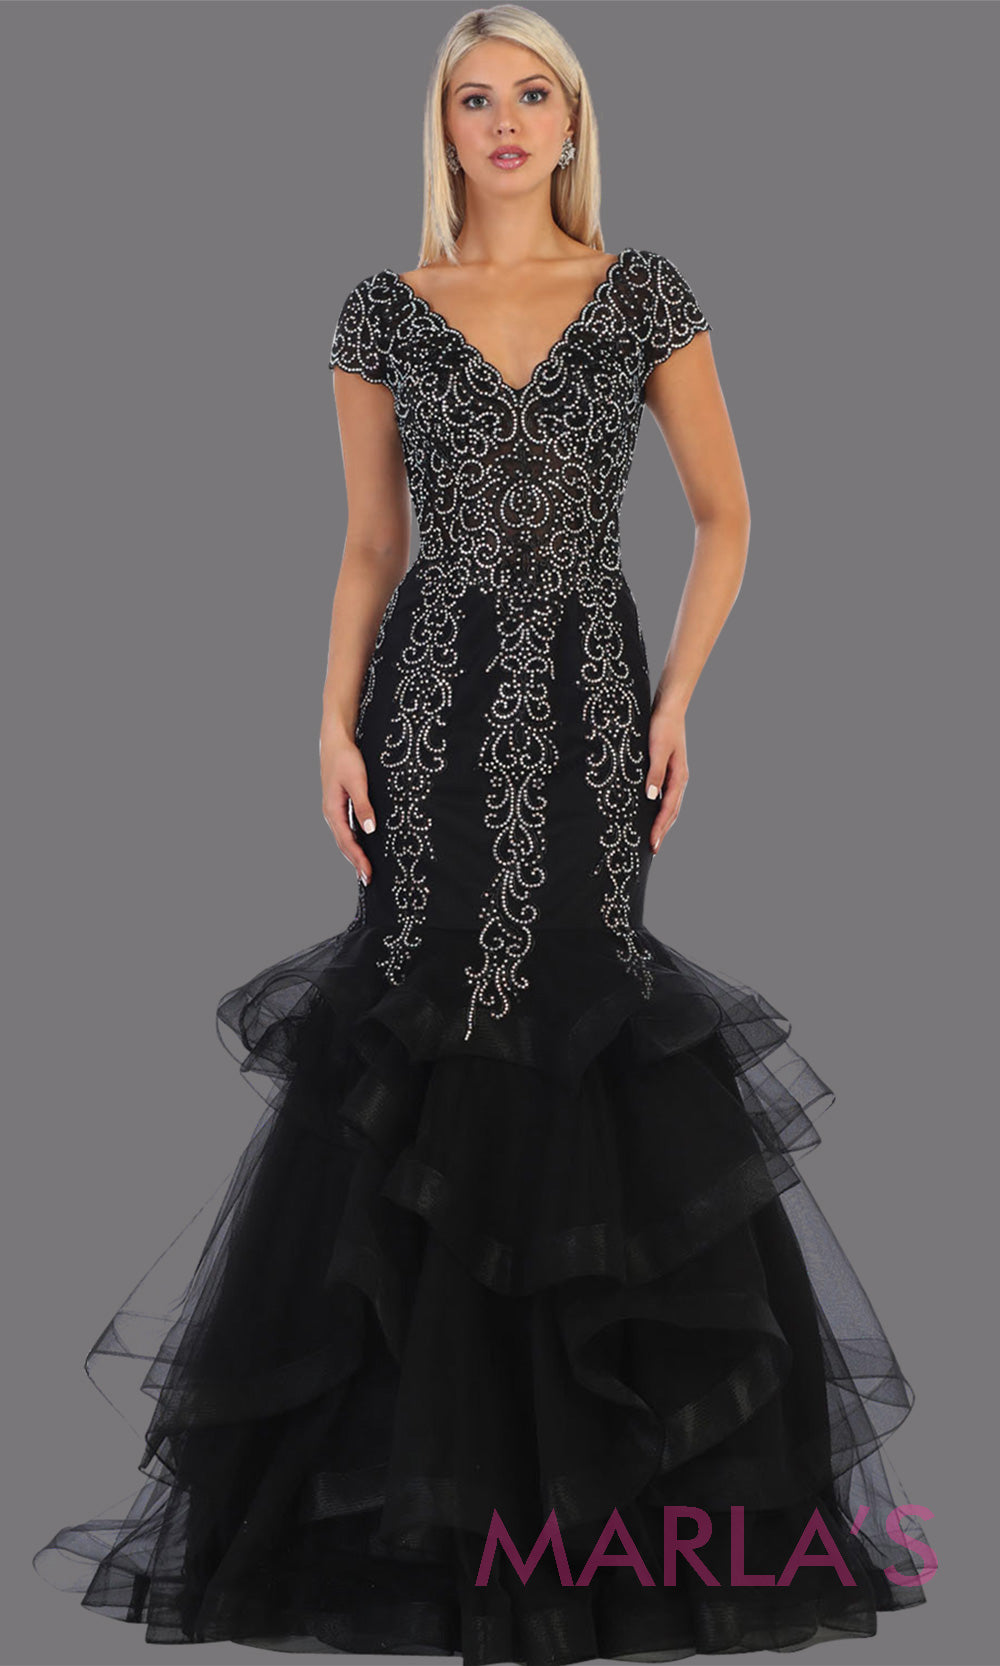 Long black beaded mermaid gown with cap sleeve, beading, 3 tier skirt from MayQueen RQ7690. This stunning black evening gown perfect for engagement dress, wedding reception dress, indowestern gown, engagement shoot, prom,formal gown